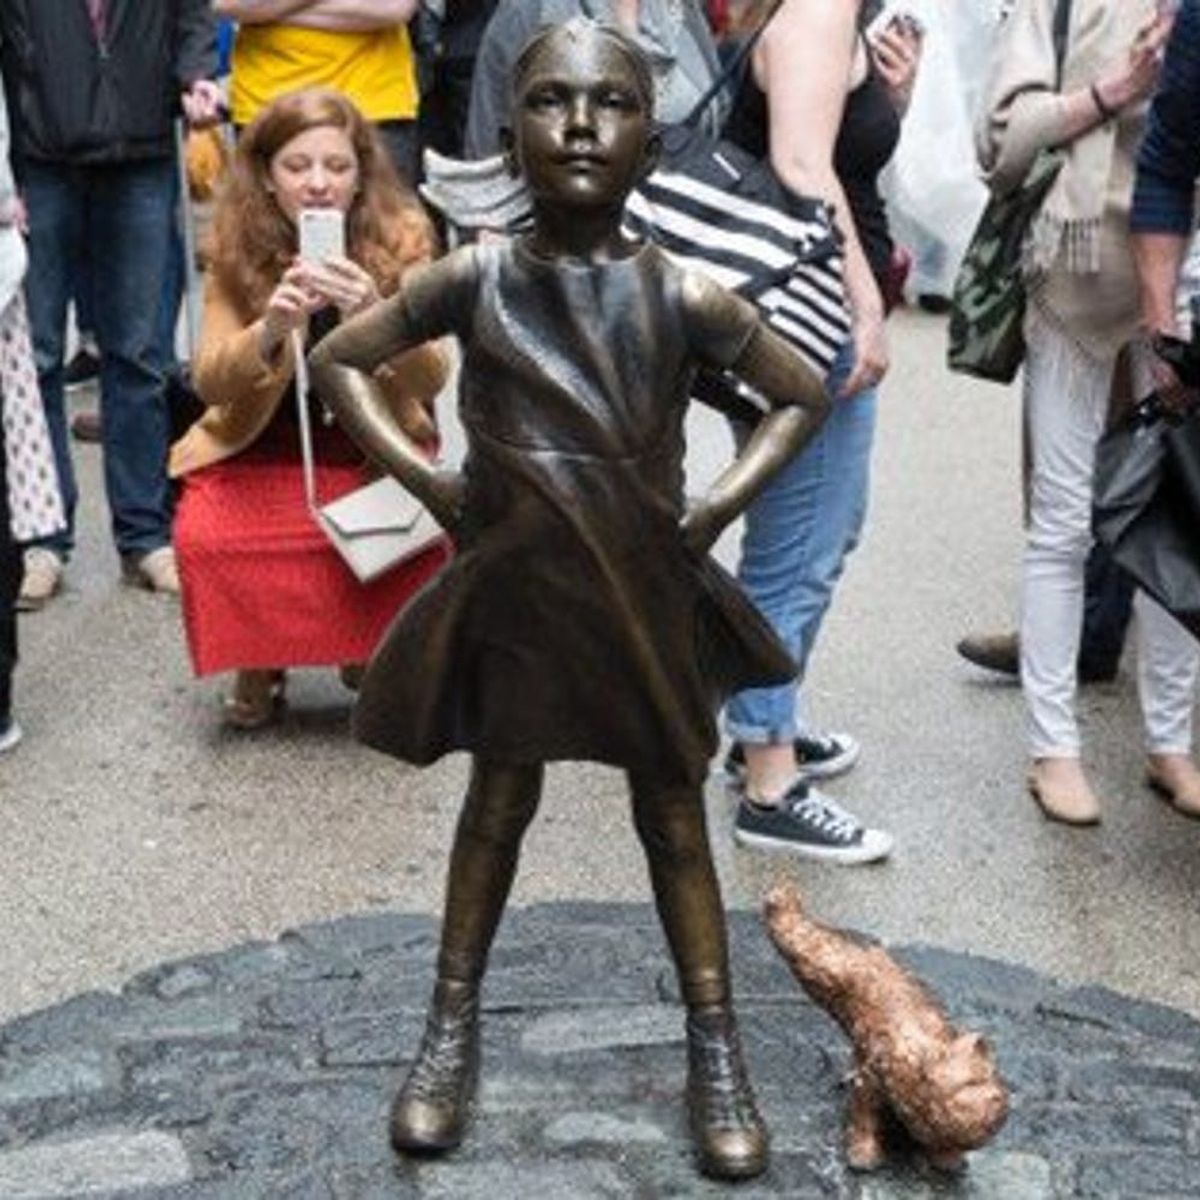 There’s Now a Peeing Dog Figure Next to the “Fearless Girl,” Seemingly Installed Out of Spite